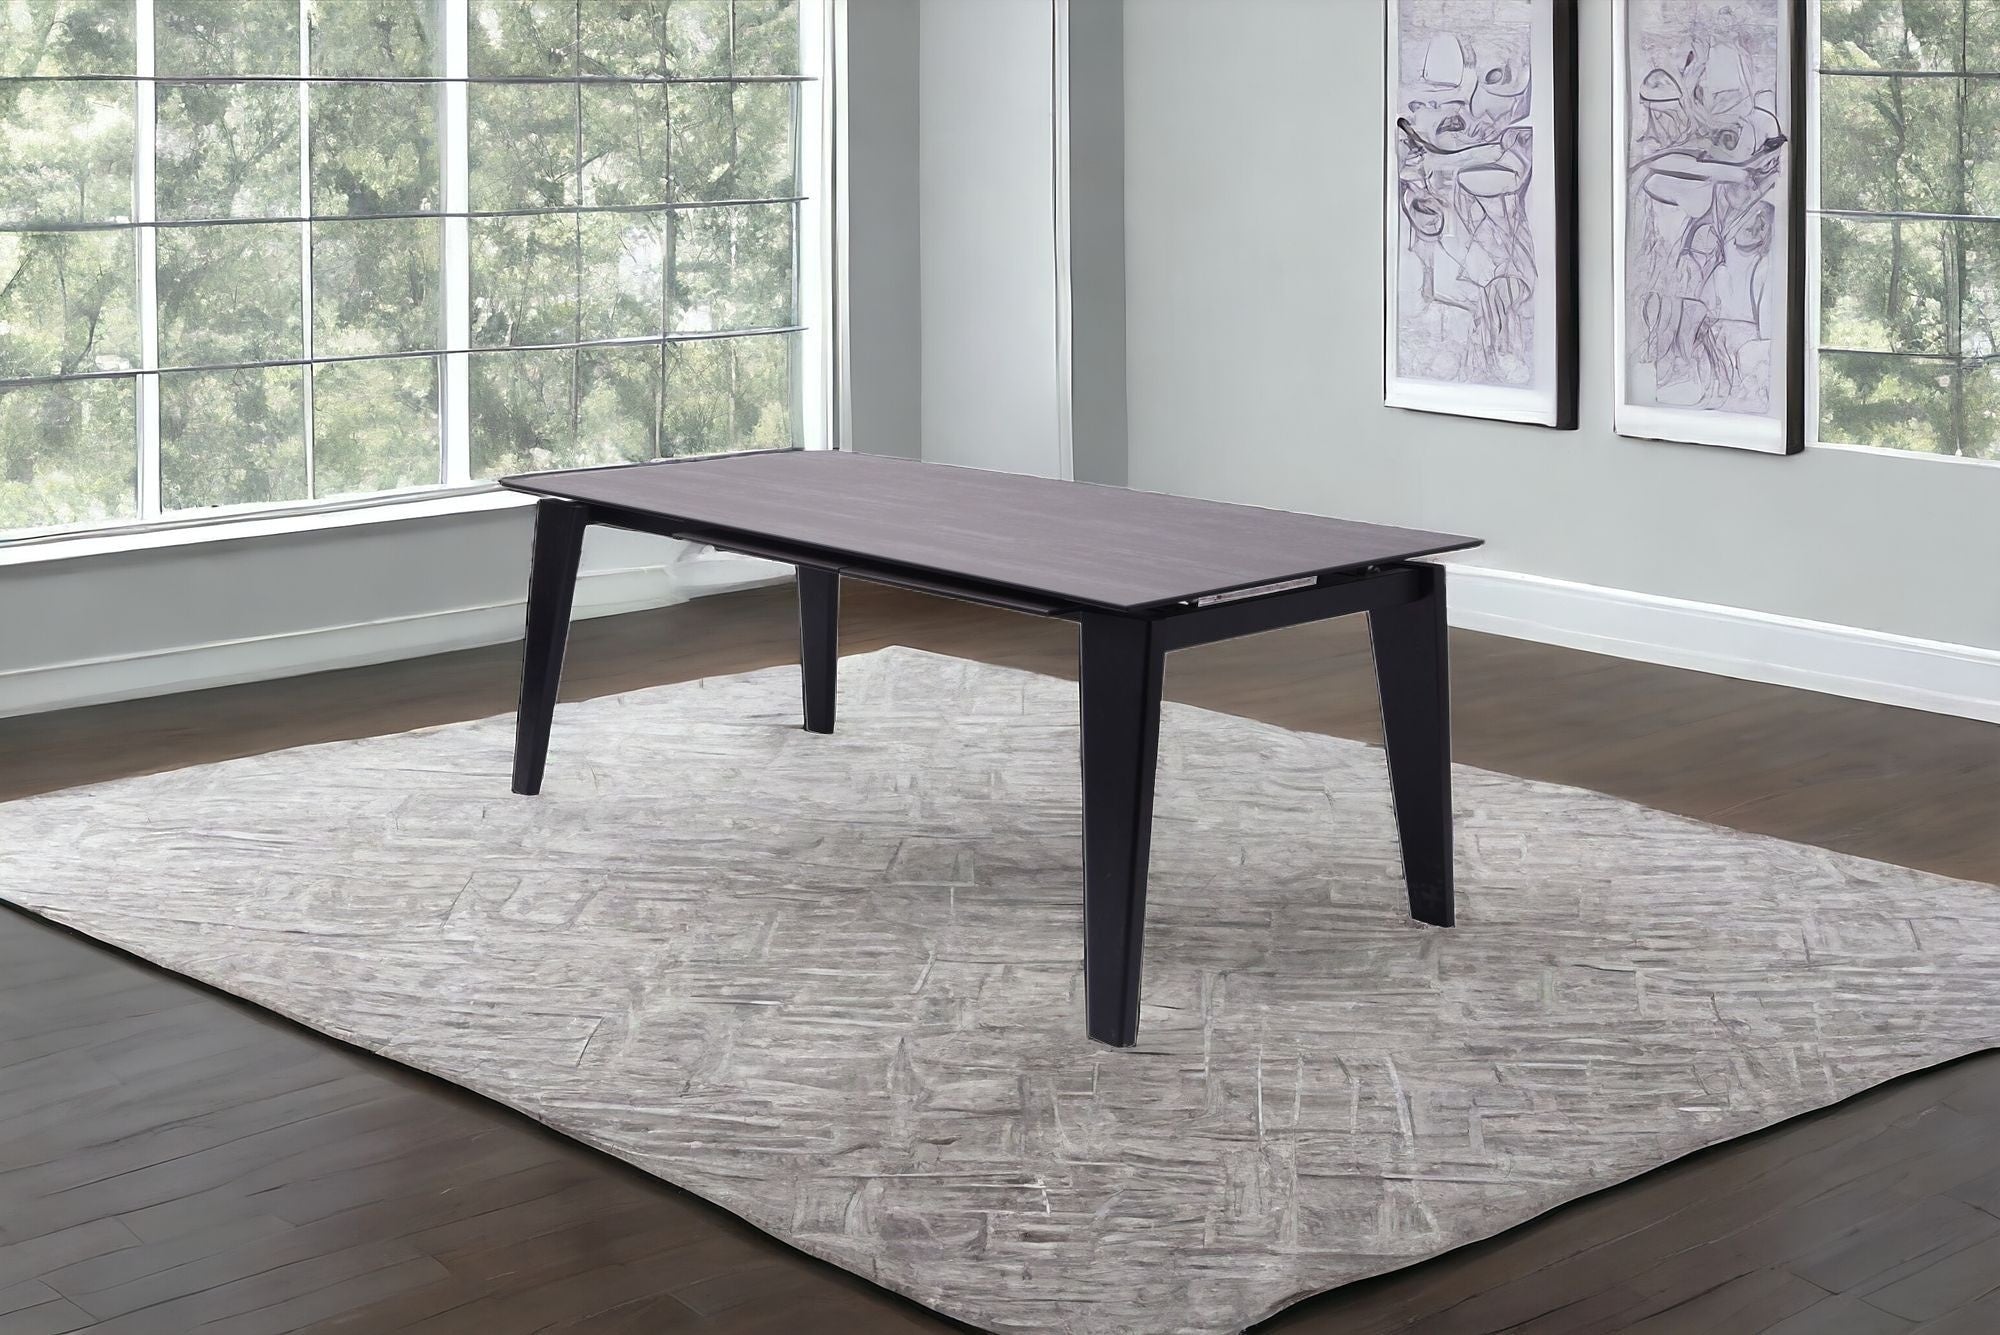 71" Gray And Black Ceramic And Solid Wood Drop Leaf Dining Table